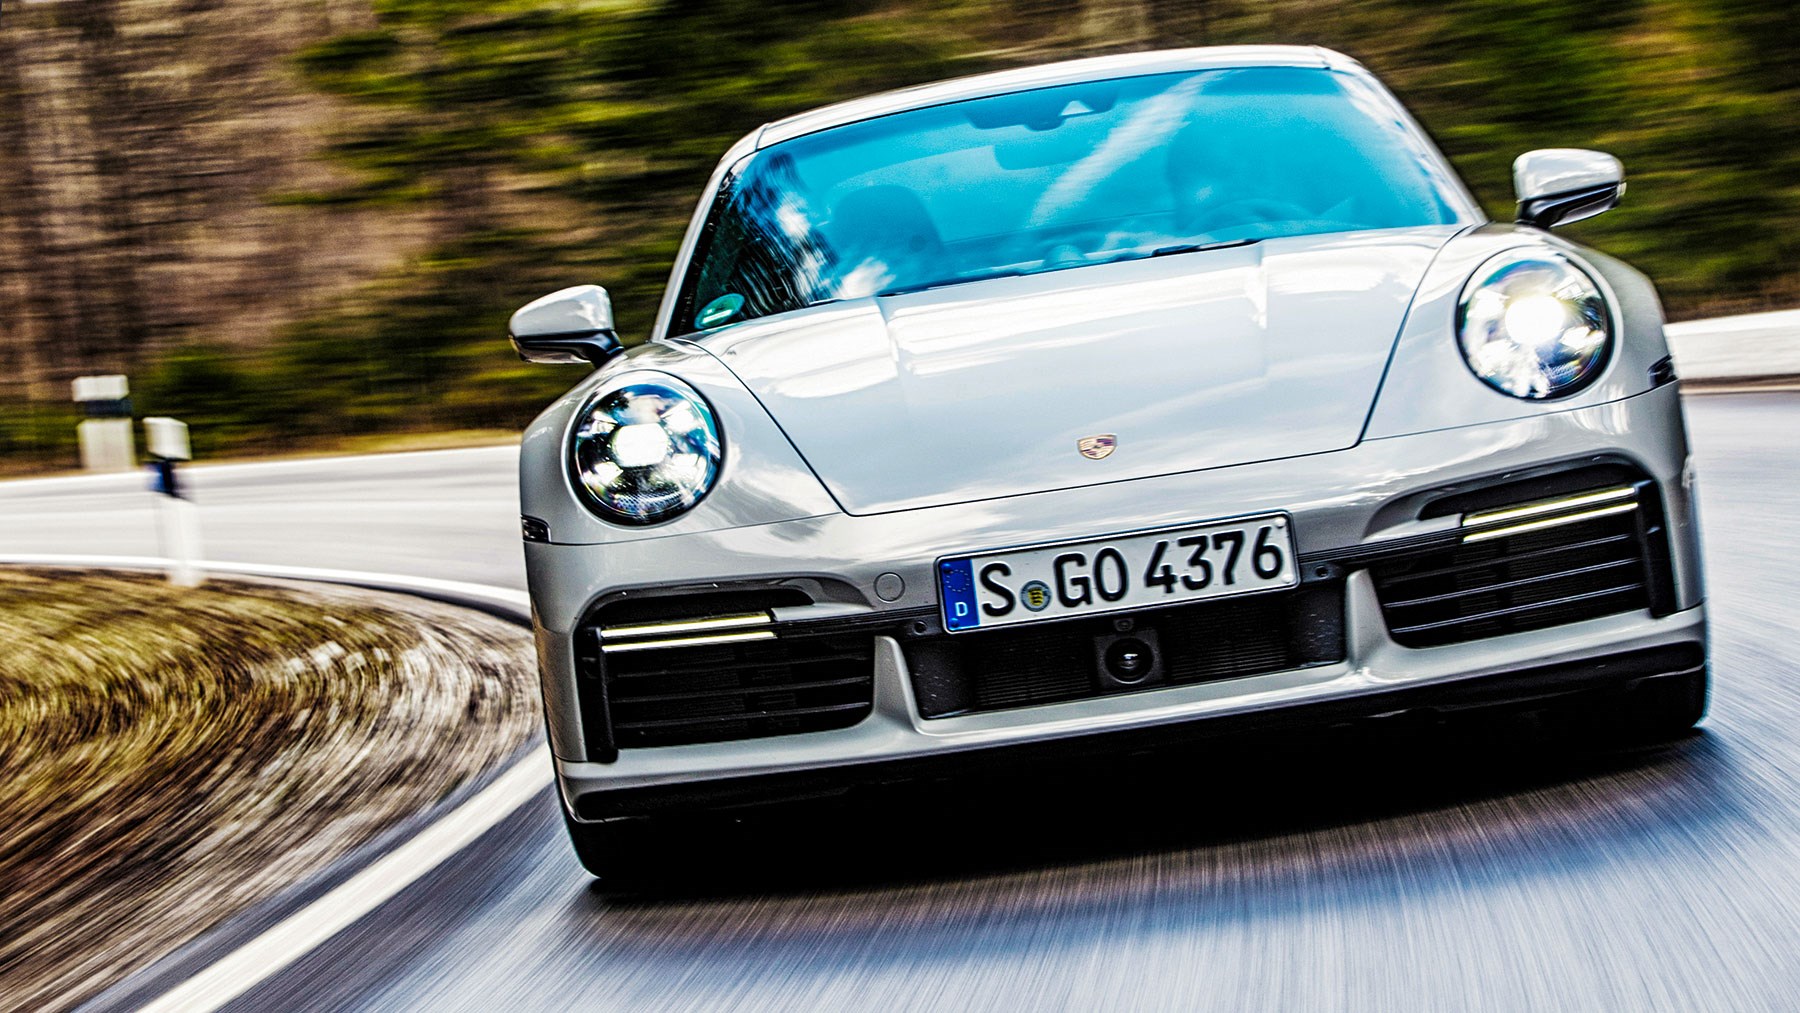 2021 Porsche 911 Turbo S Review: A New Benchmark for Sports Cars